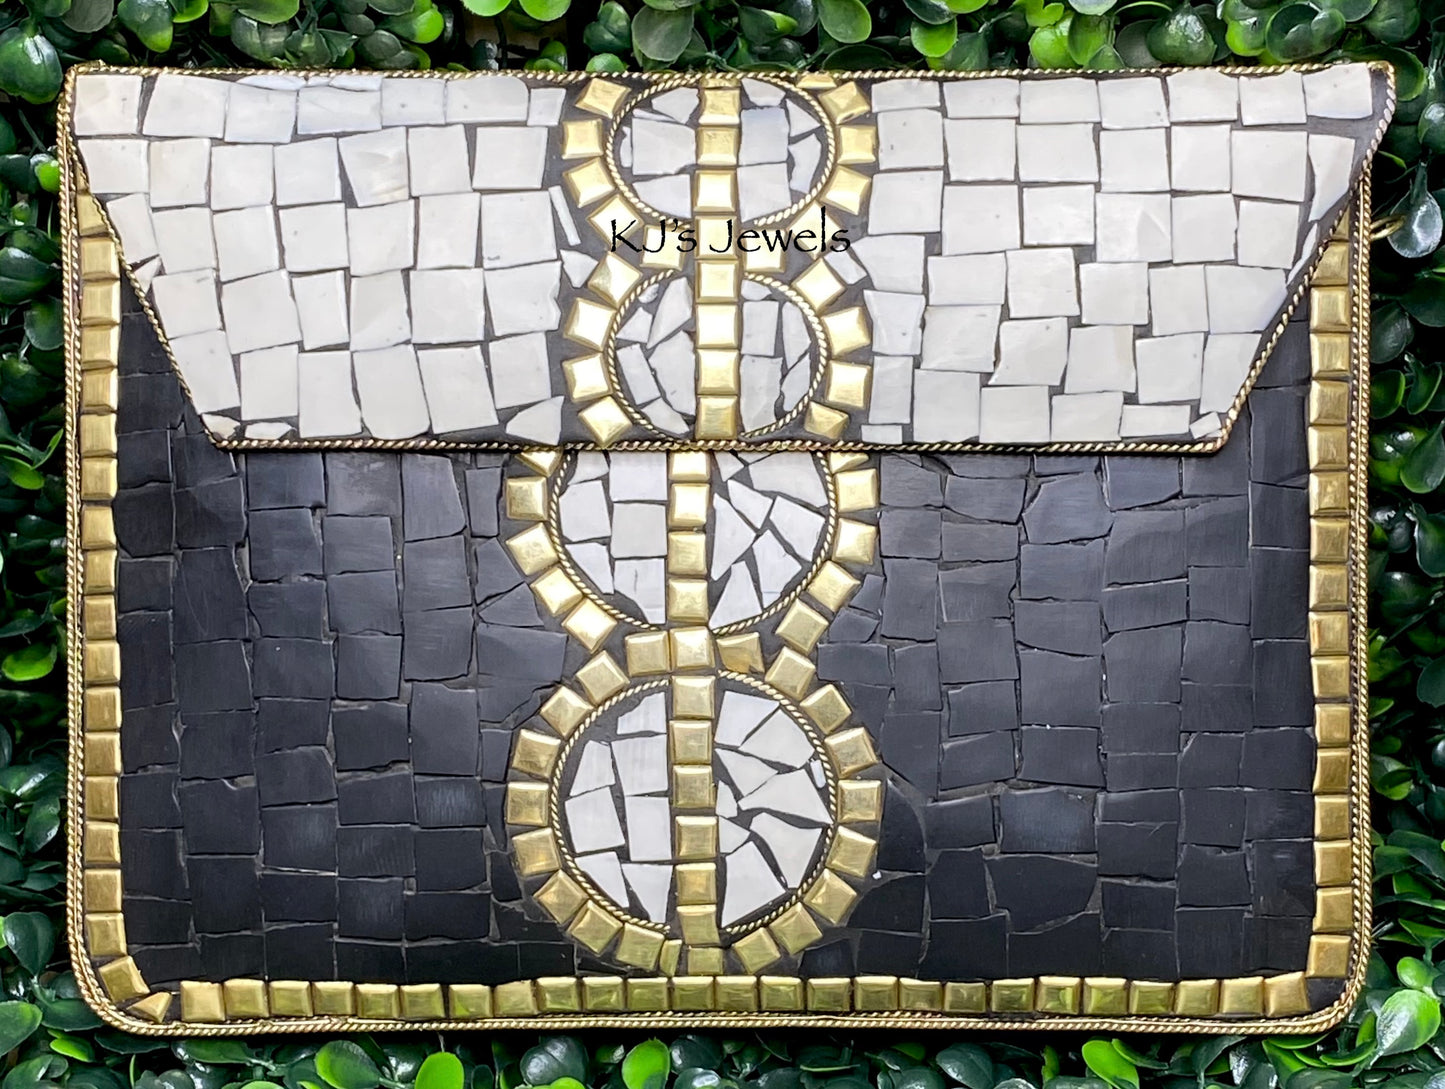 Black and White Mosaic Tile Bag with Gold Metal Accent Tiles